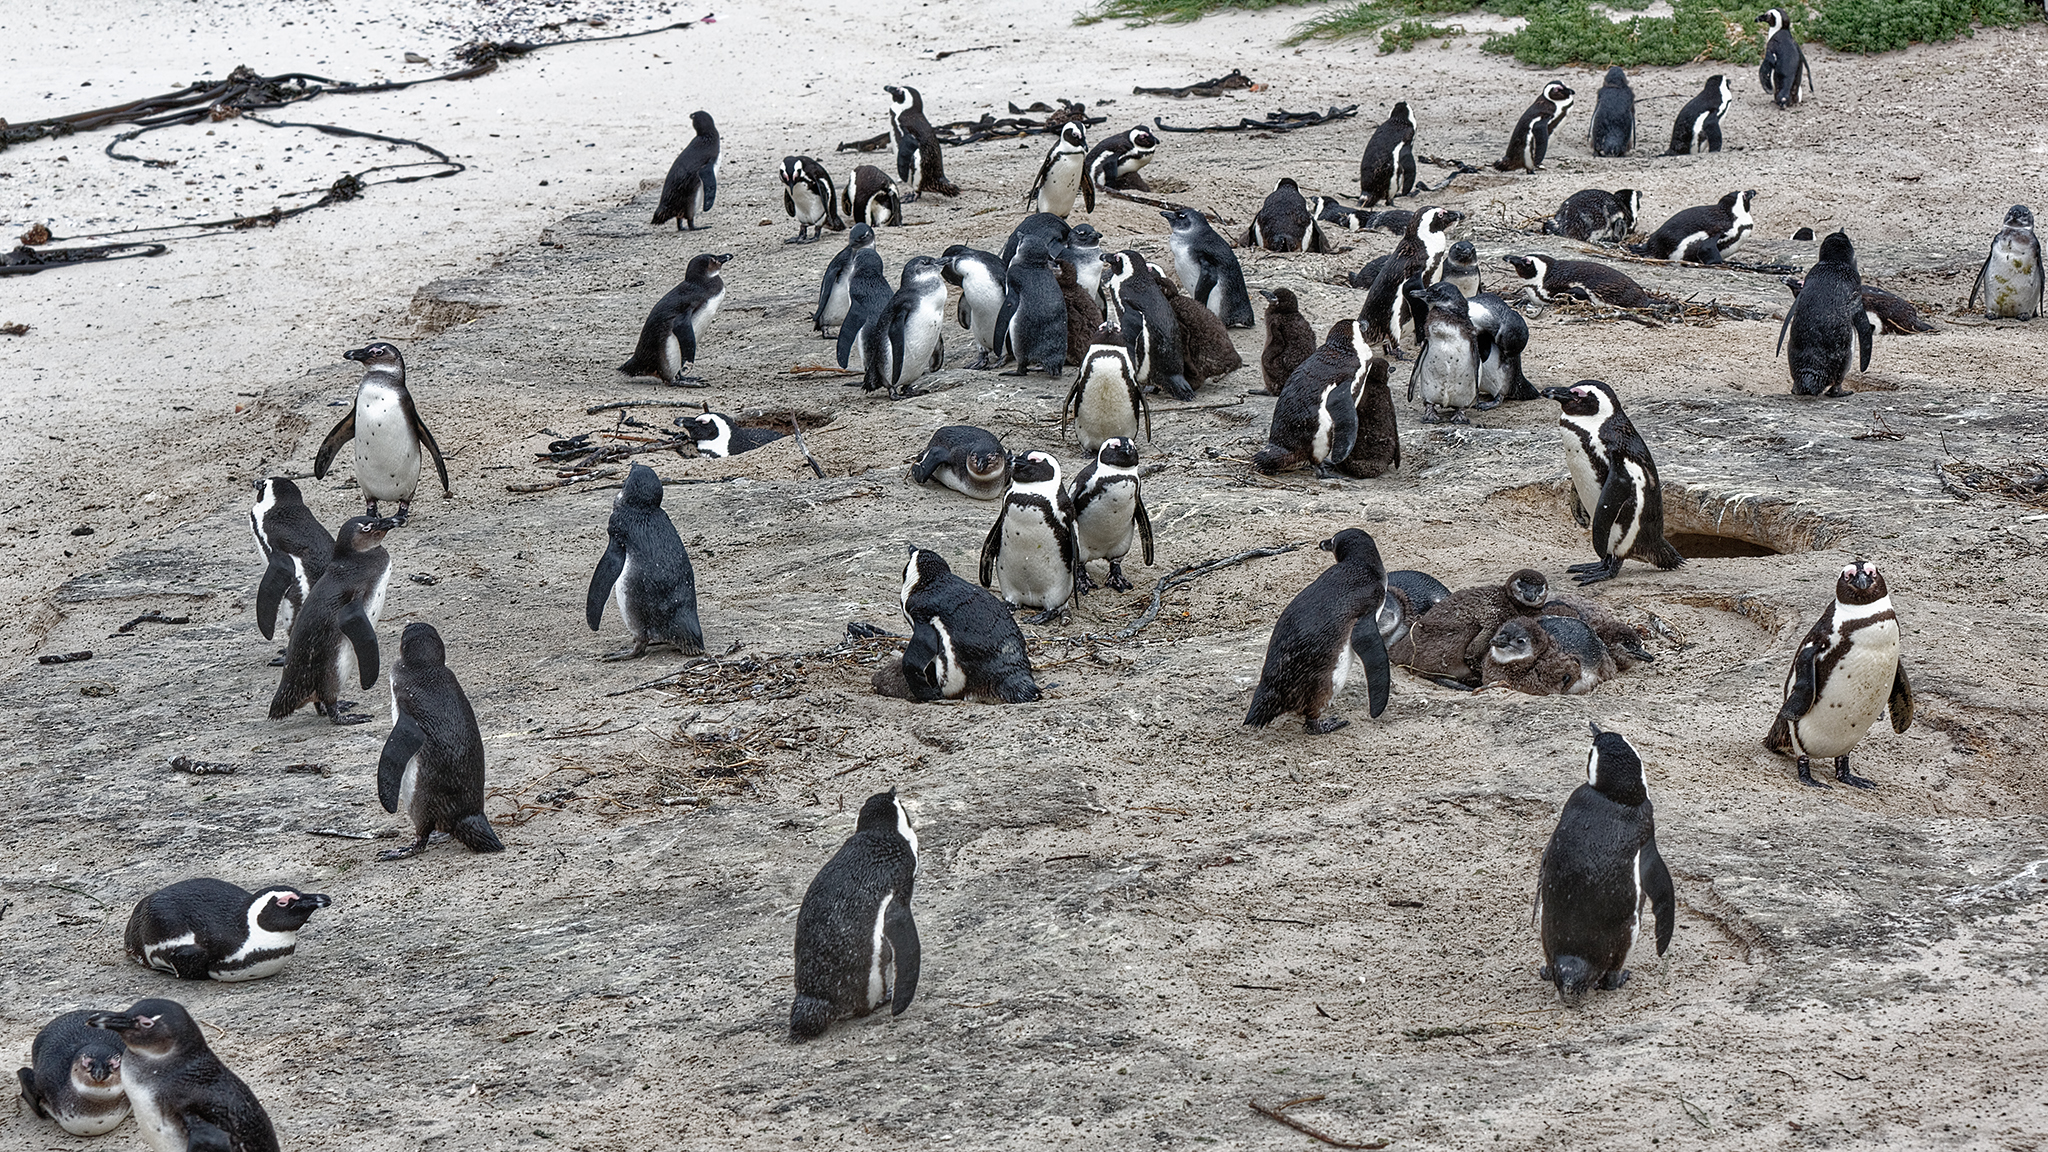 The island of the Penguins...